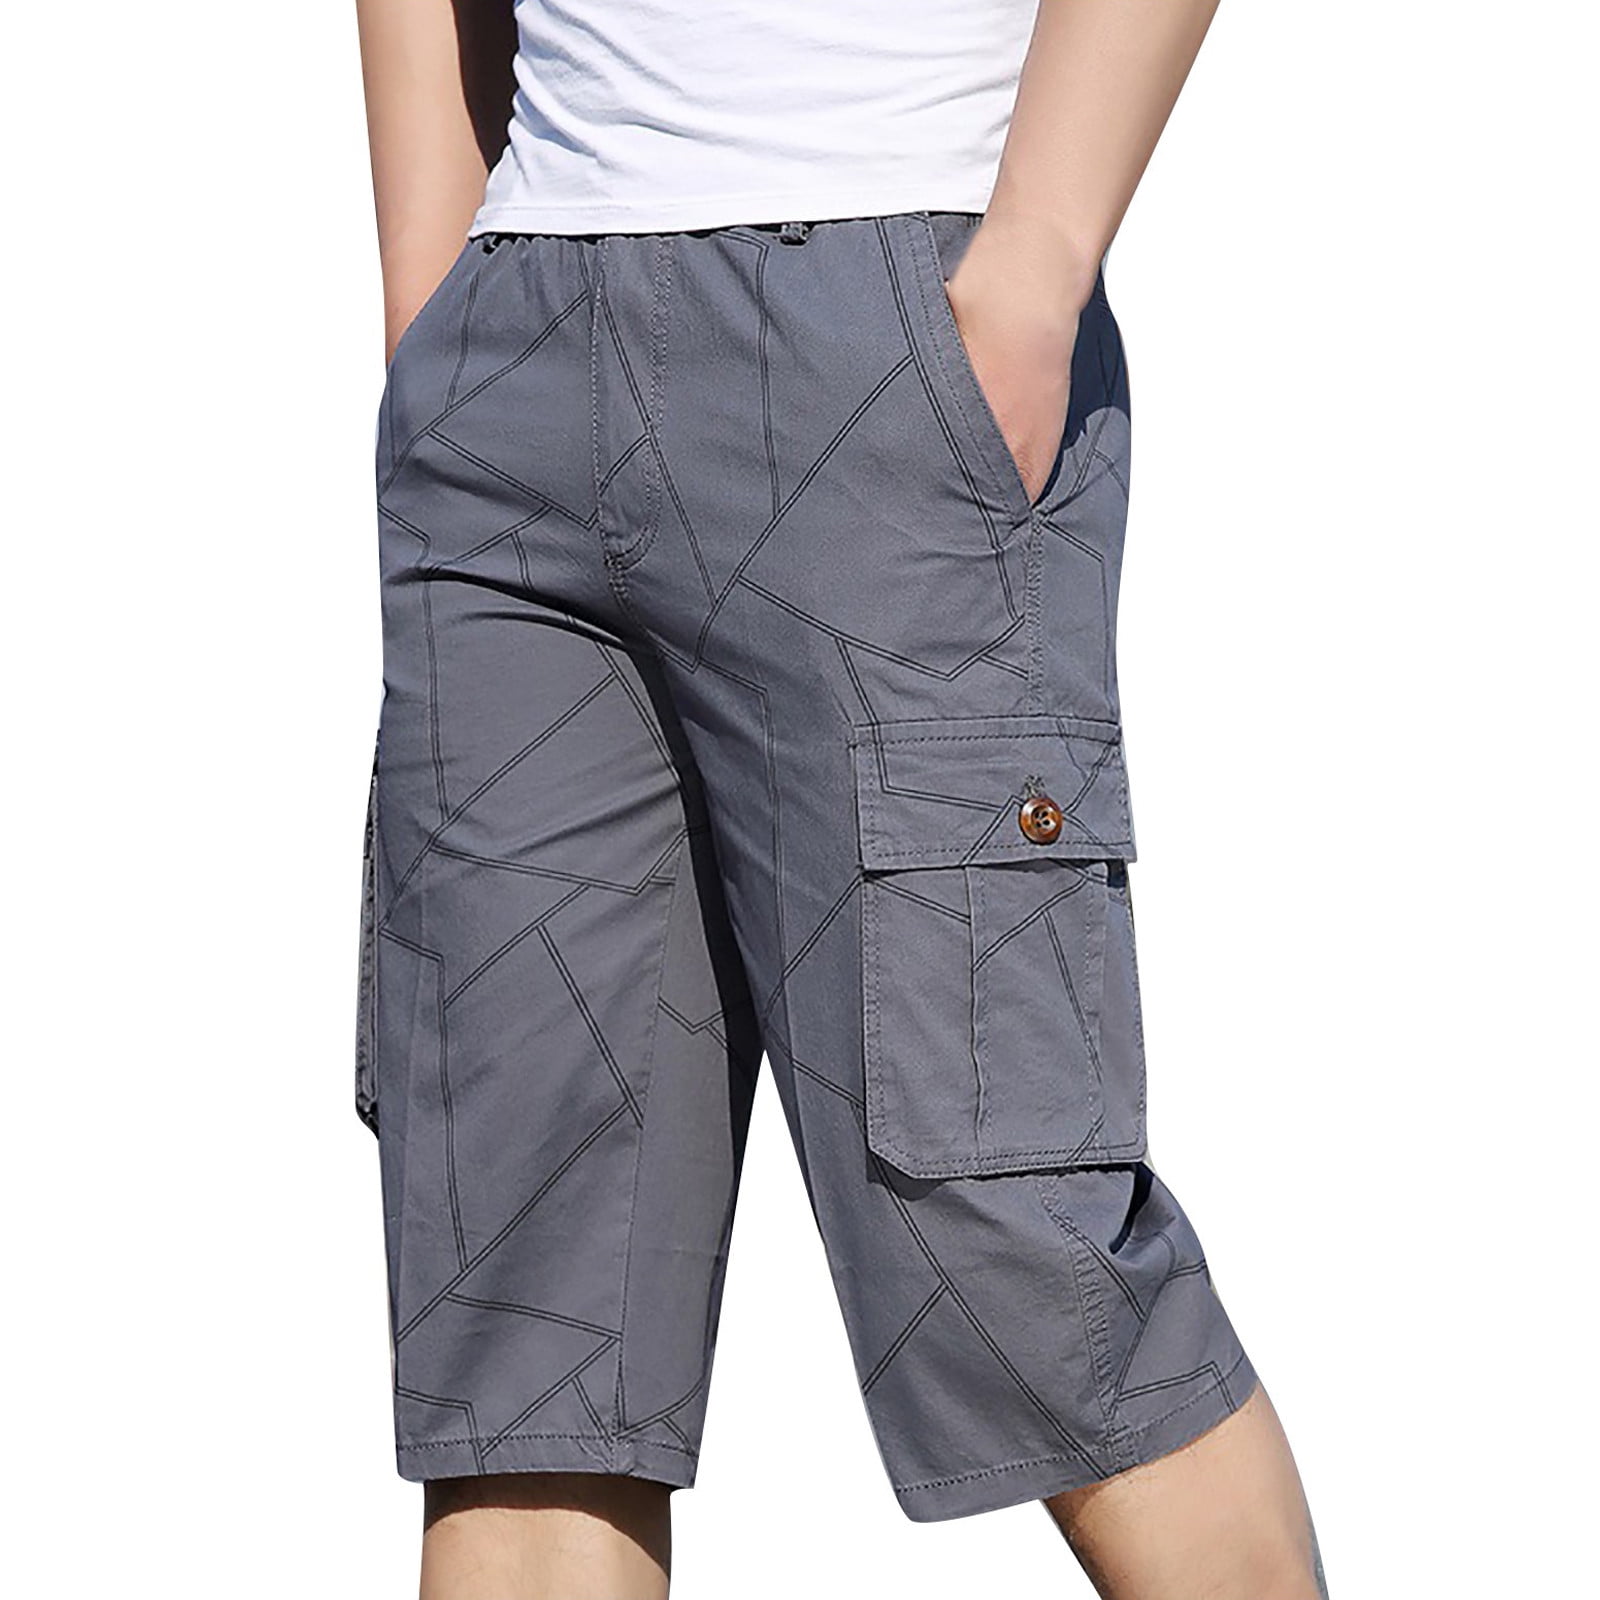 adviicd mesh Shorts Men Men's Capri Long Twill Cargo Shorts Below Knee 13  Inches Cotton Relaxed Fit Casual Multi-Pocket Mens Shorts